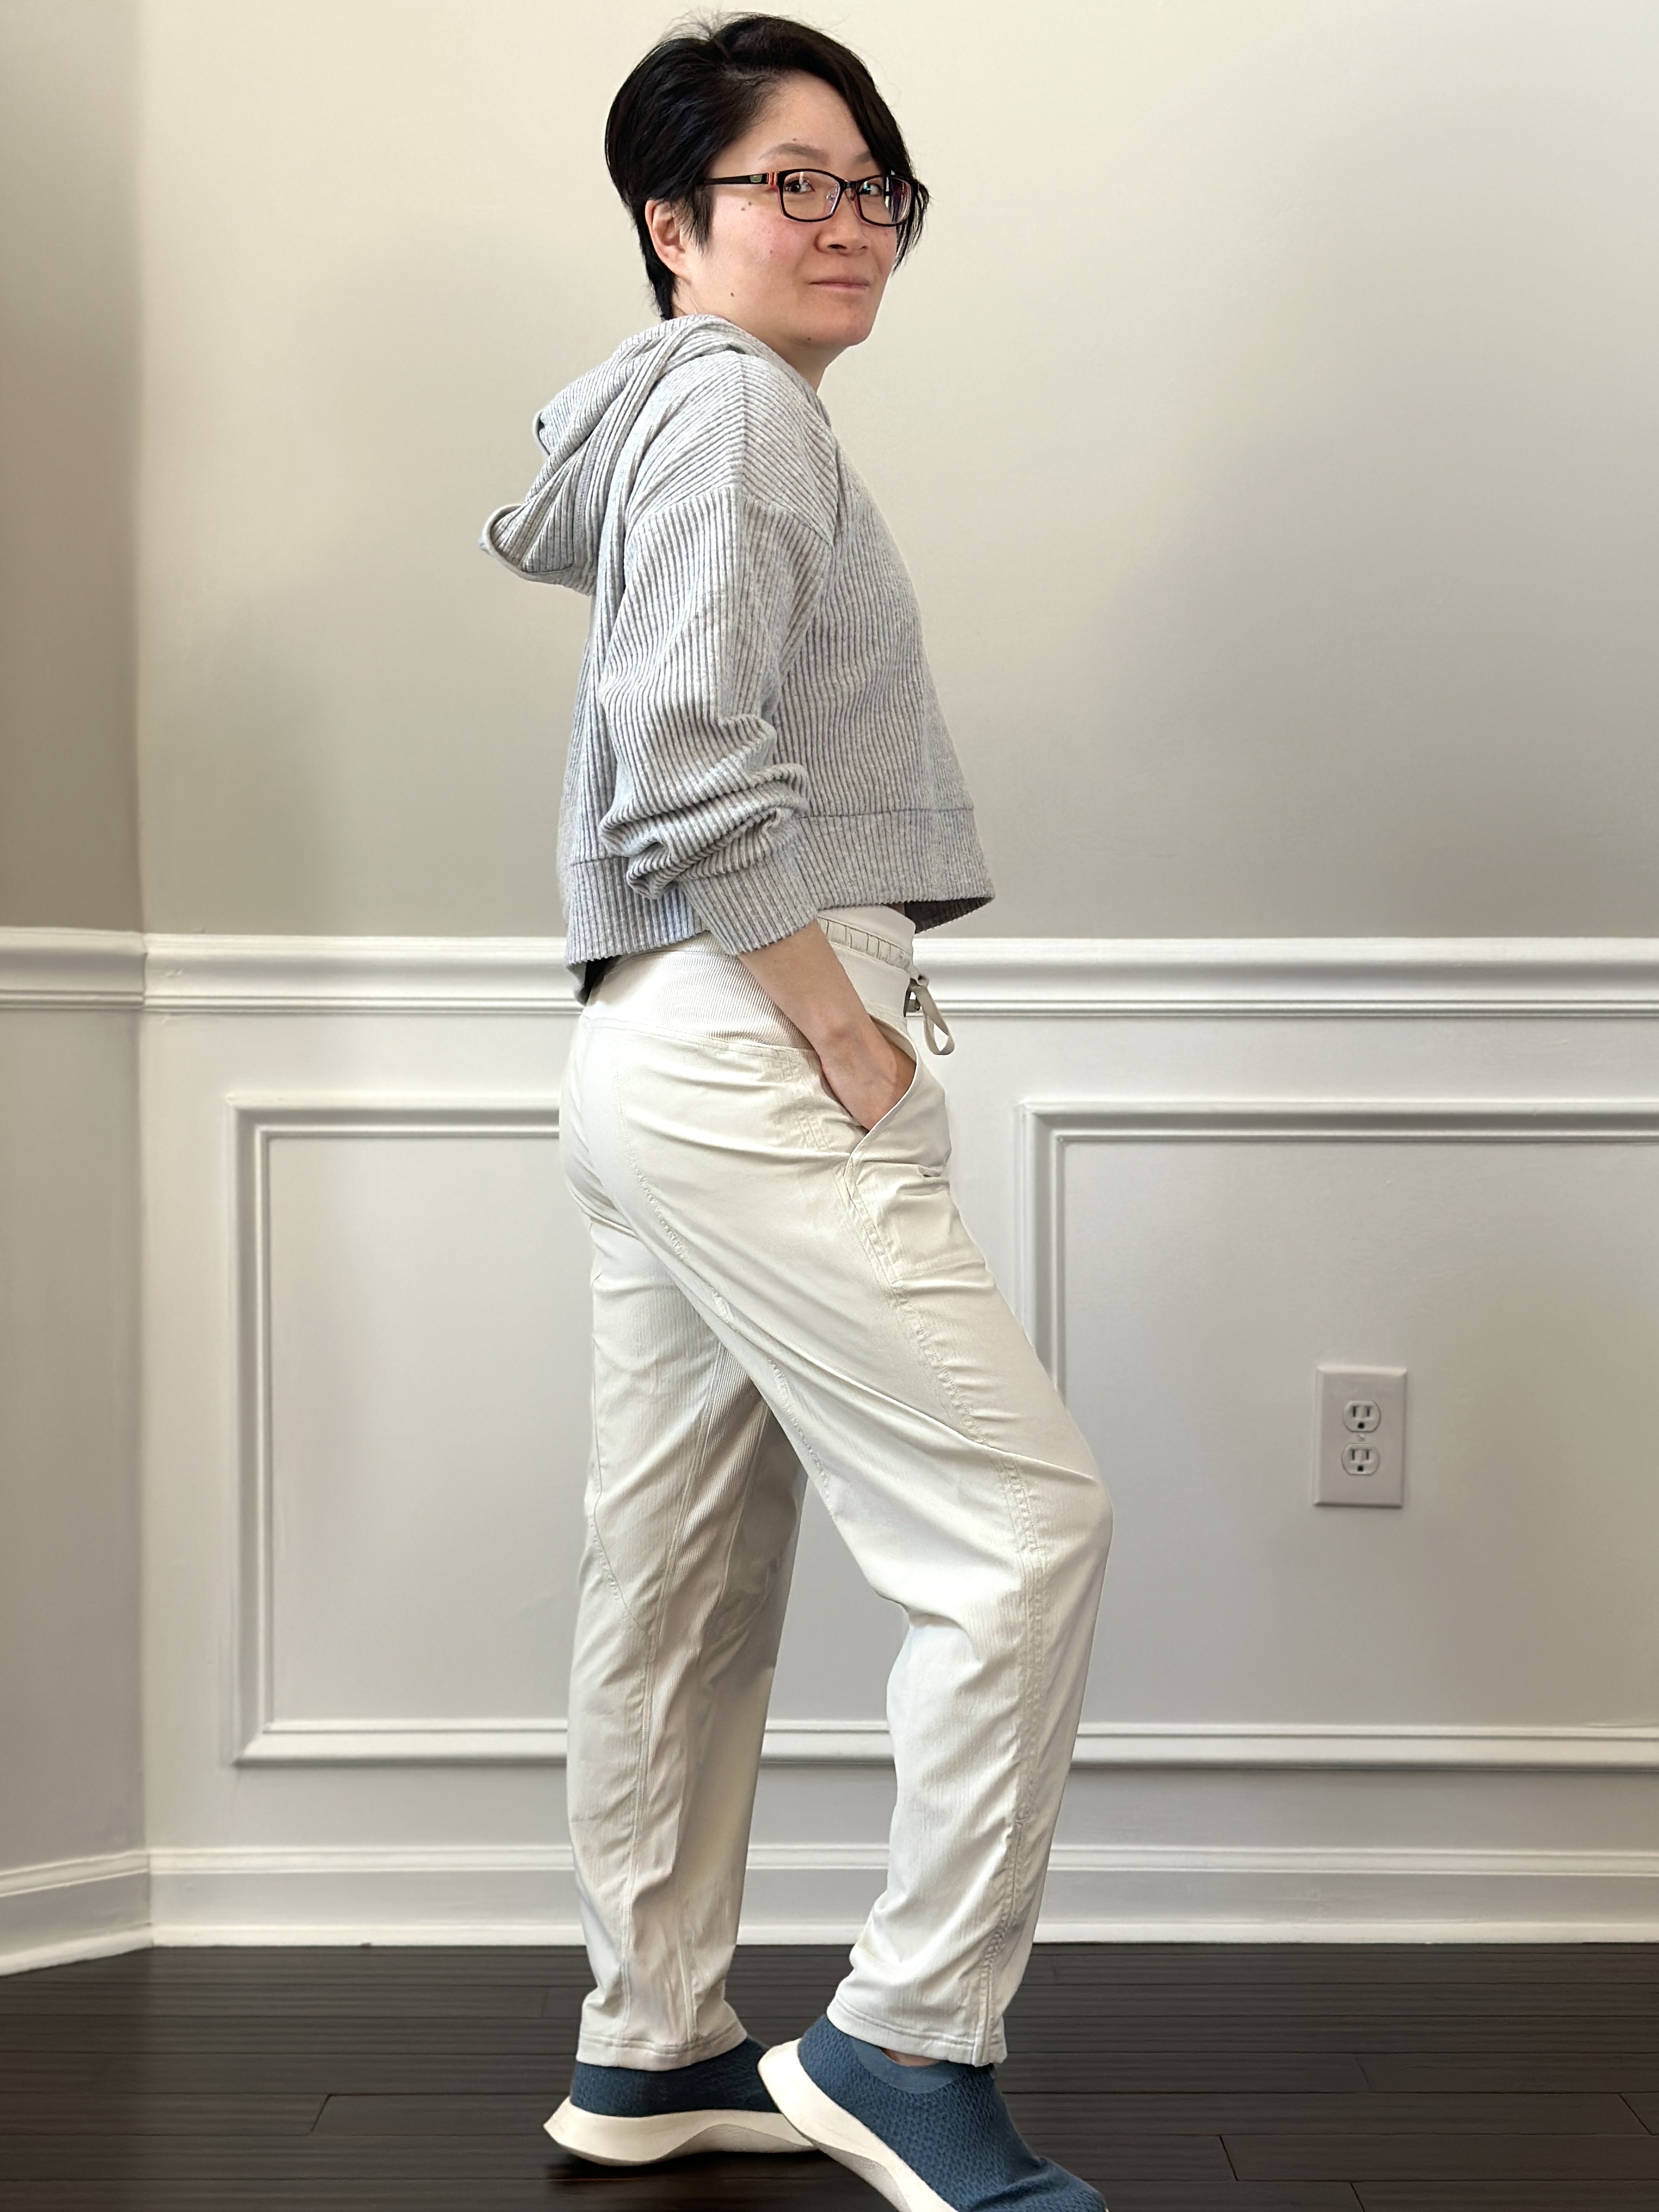 Fit Request Friday! Dance Studio Mid-Rise Cropped Pant